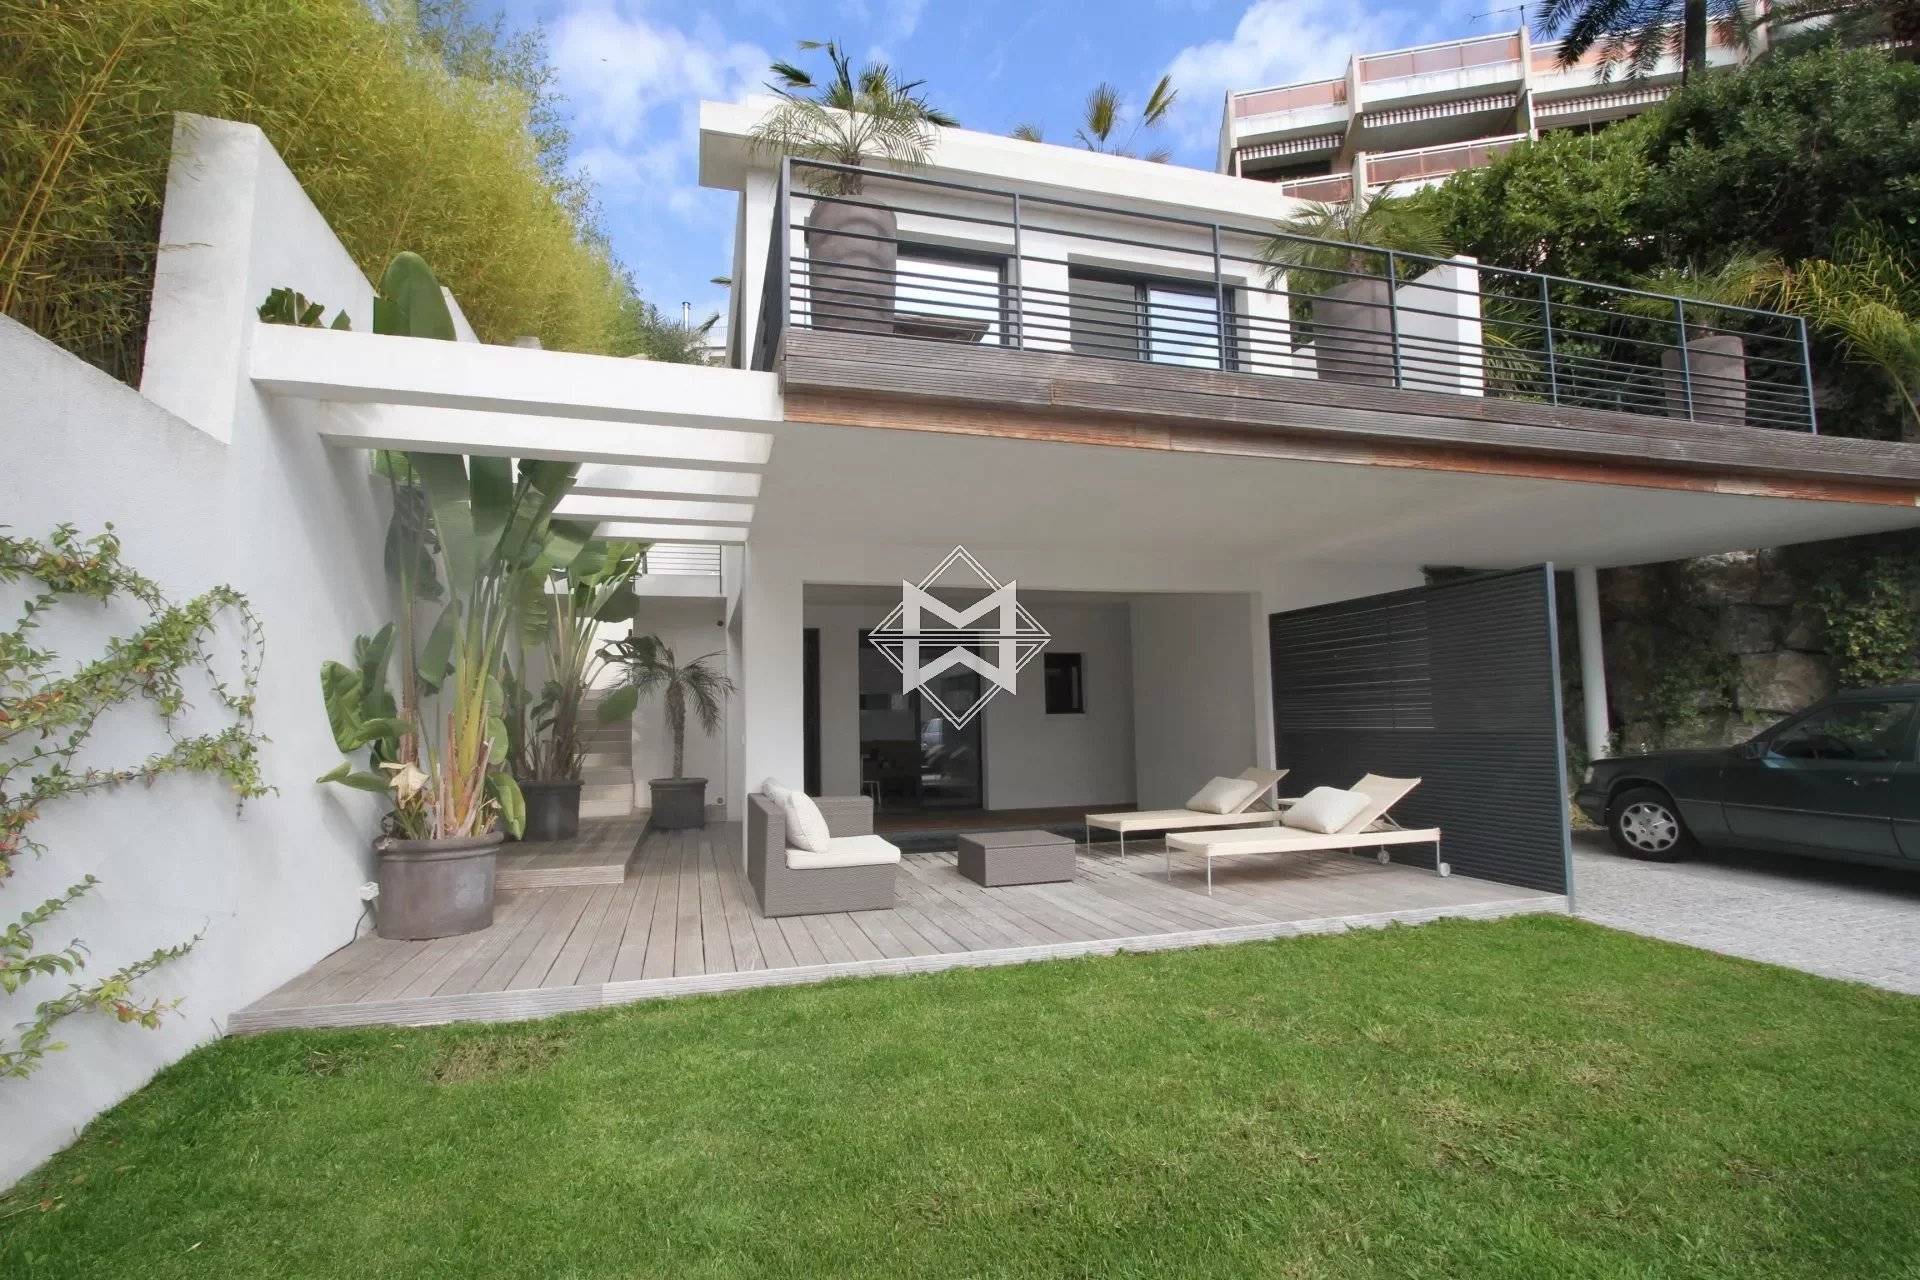 Stunning Contemporary House with Pool in Cannet Résidentiel - Ideal Location near the center